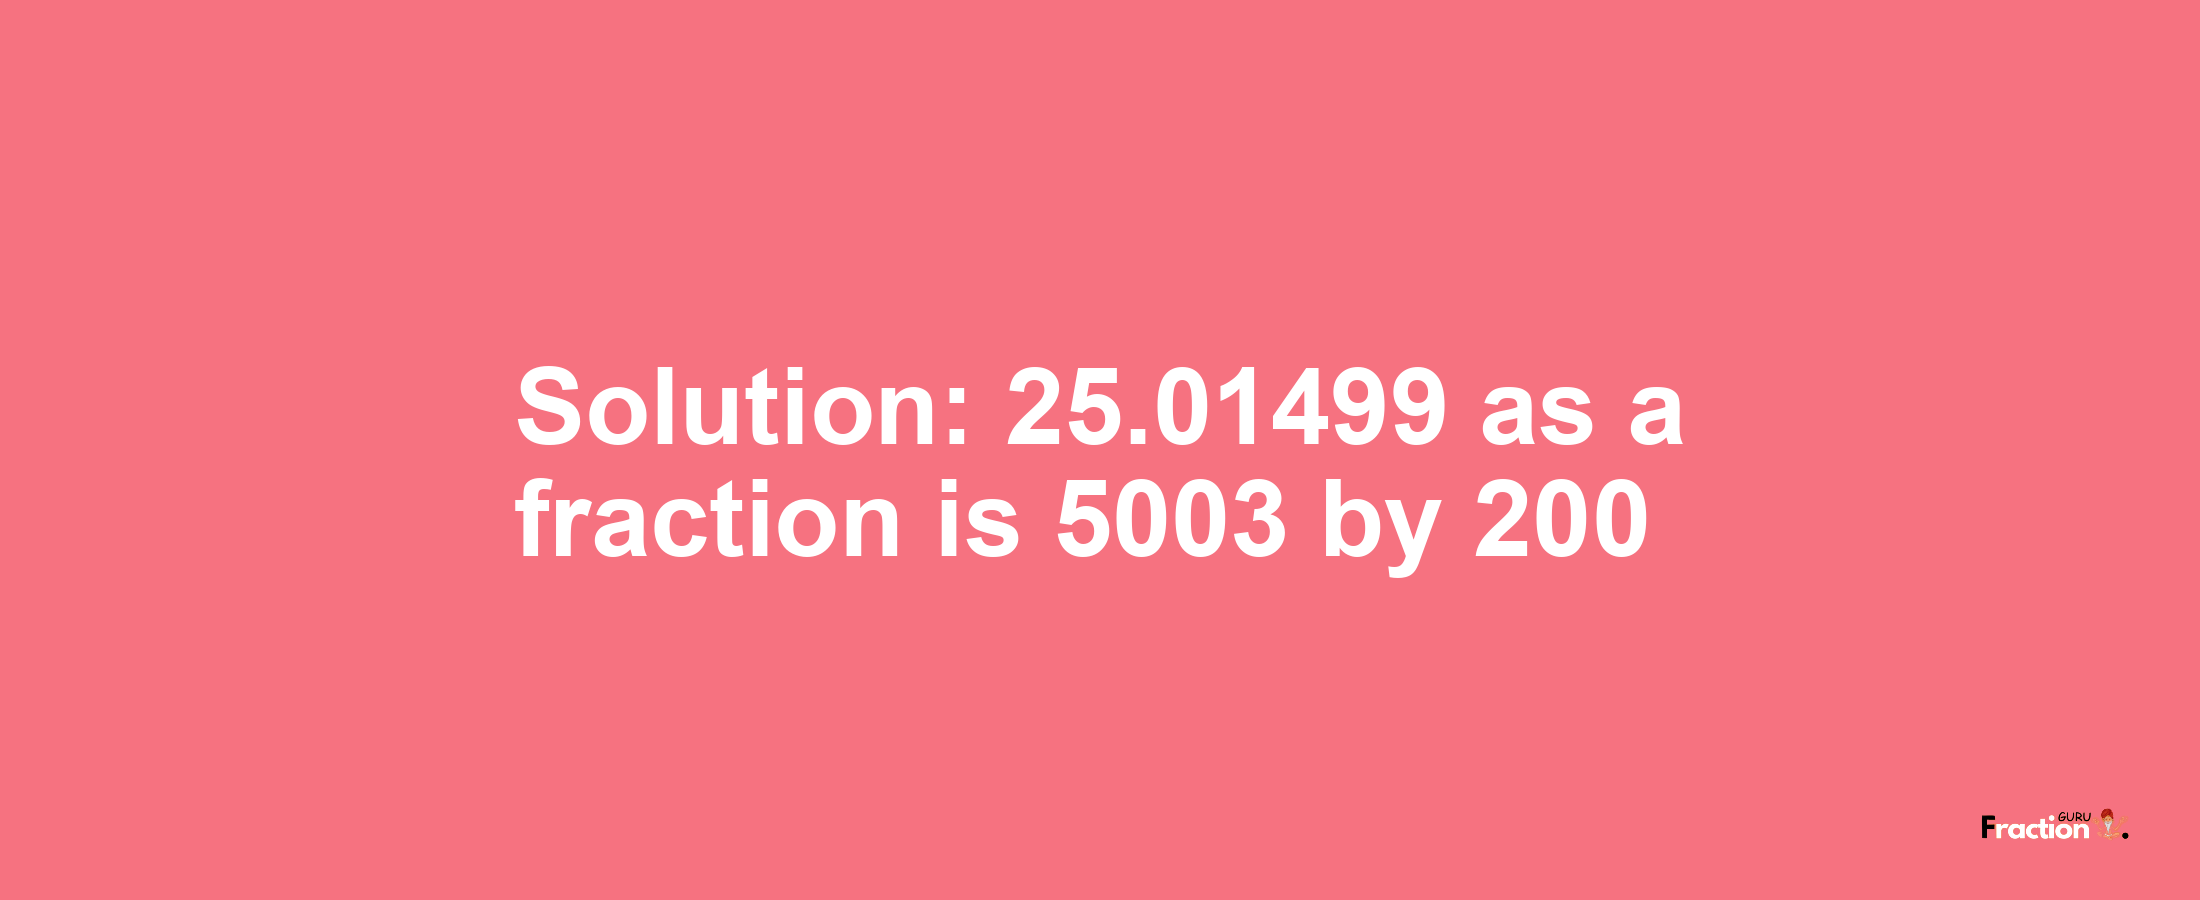 Solution:25.01499 as a fraction is 5003/200